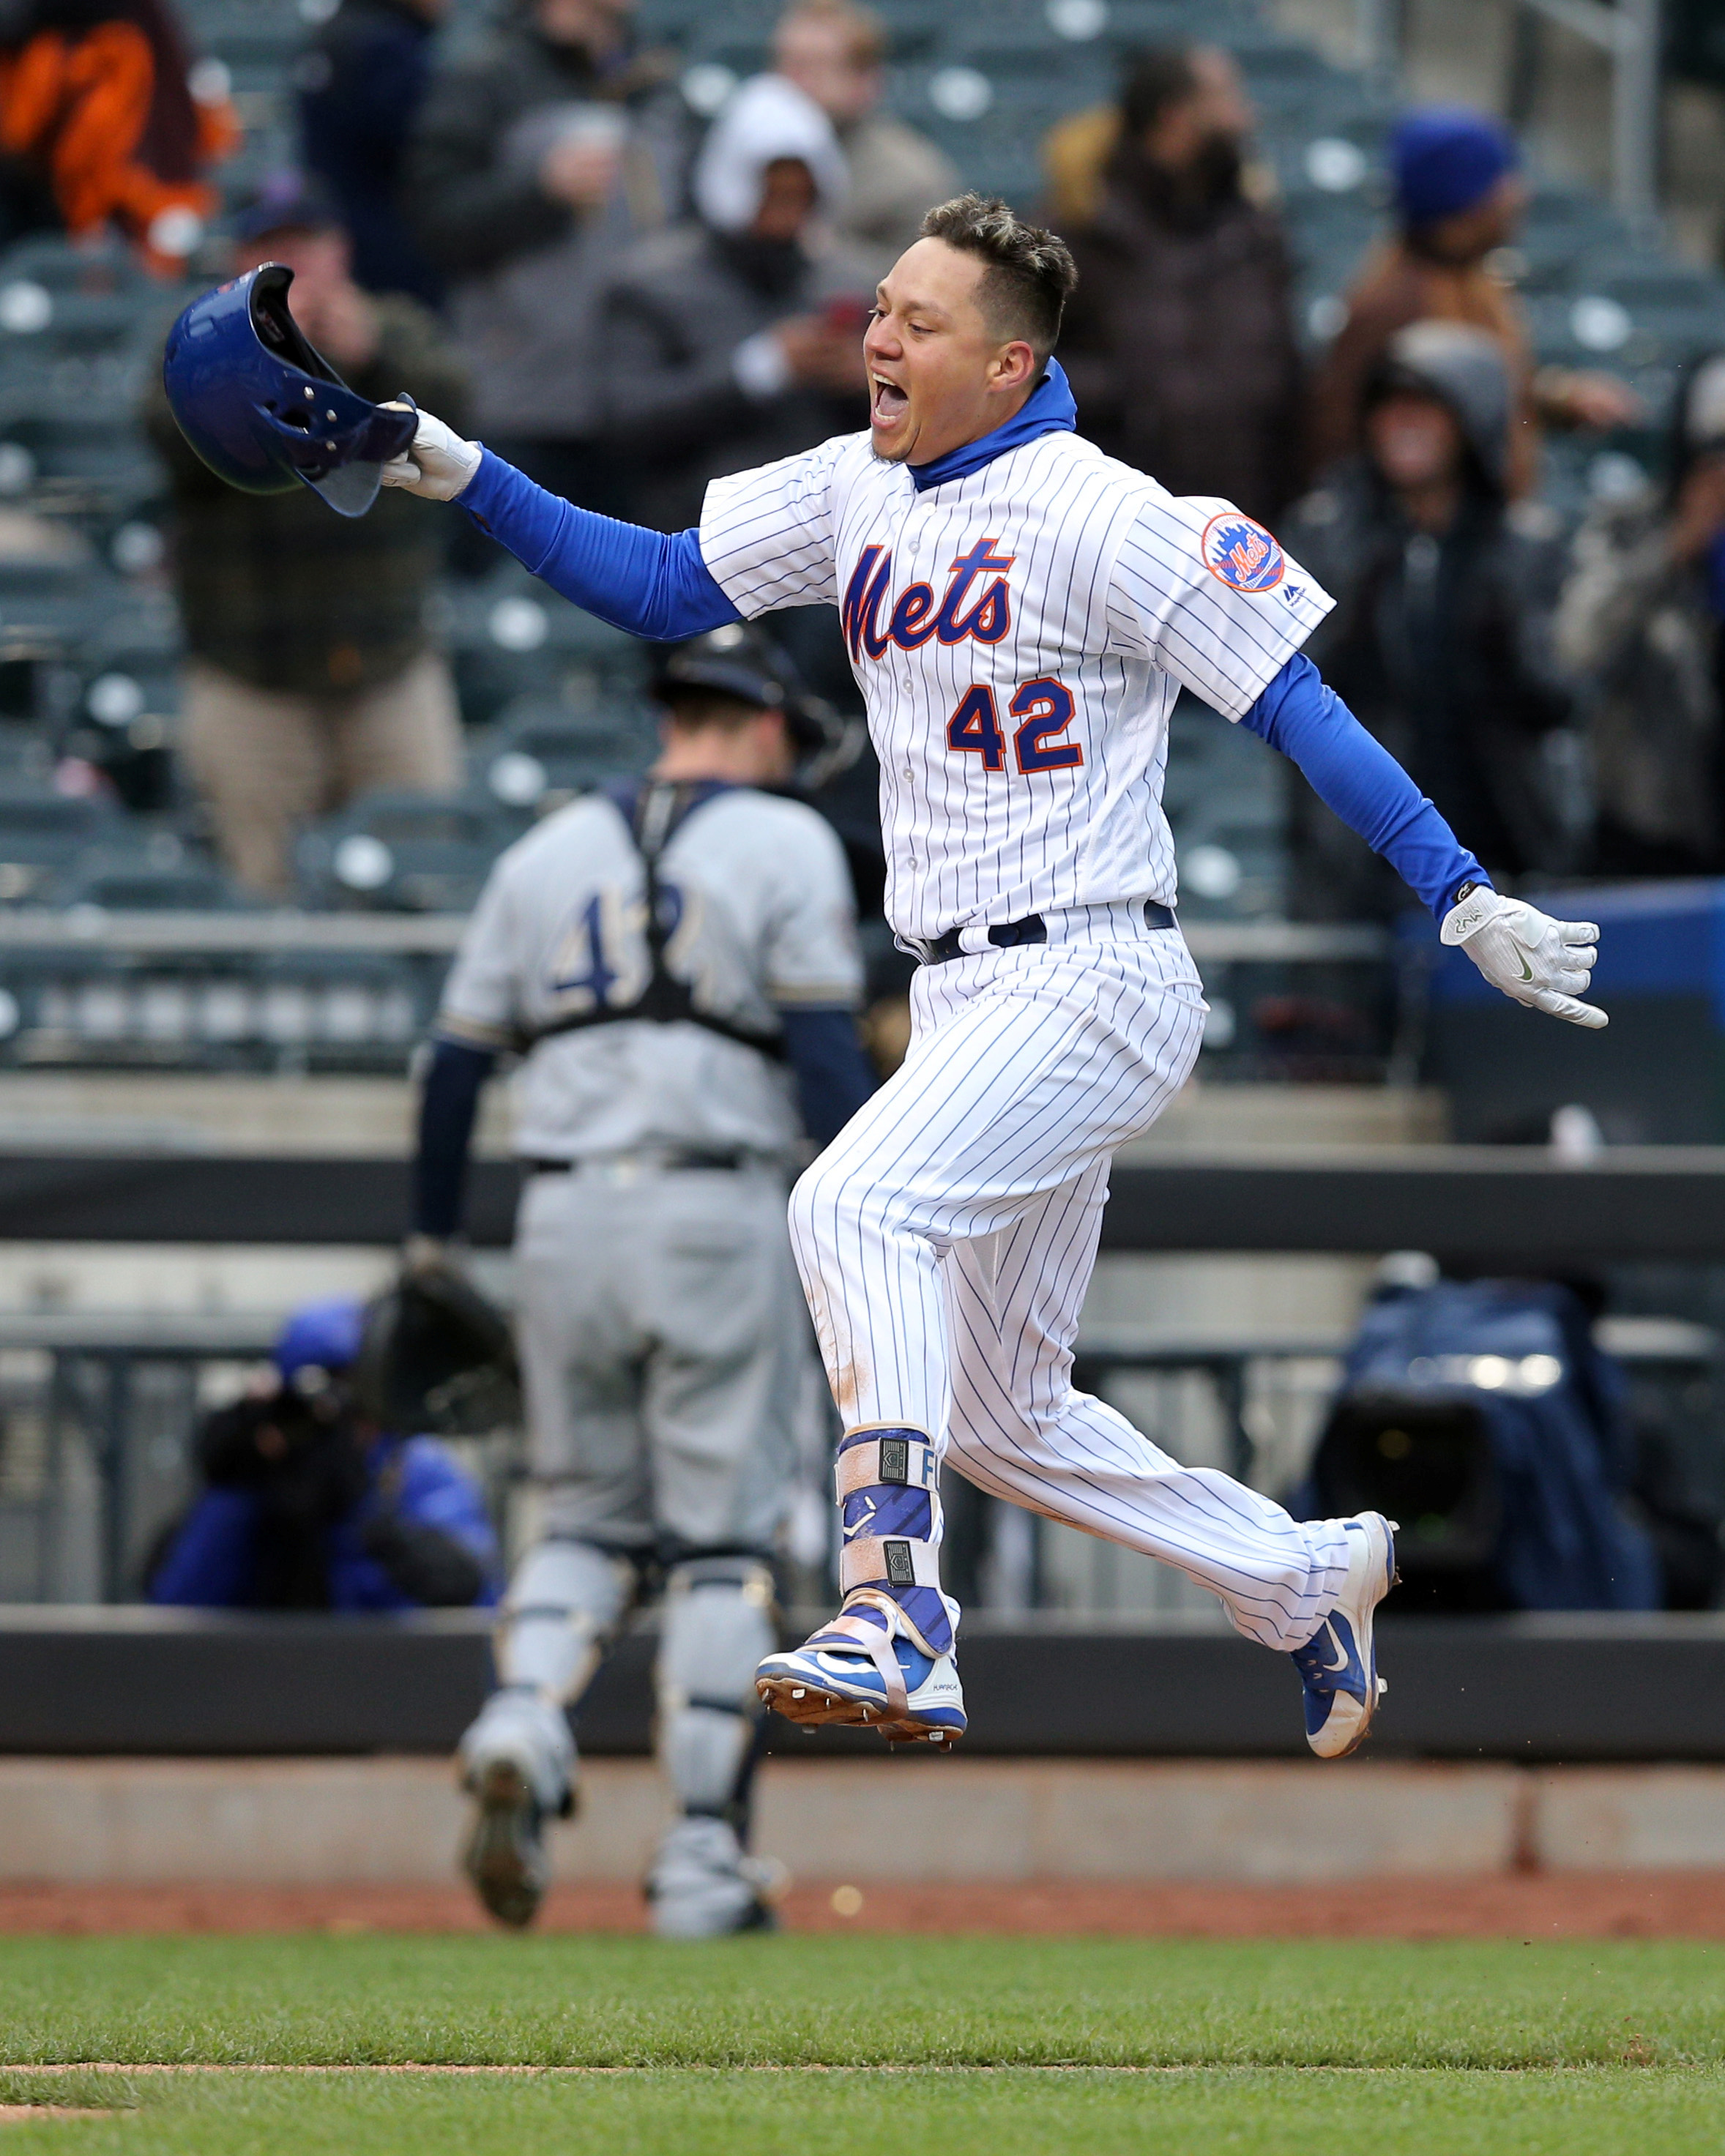 Tears of renown: Wilmer Flores offers rare proof that stars are just like  us, New York Mets